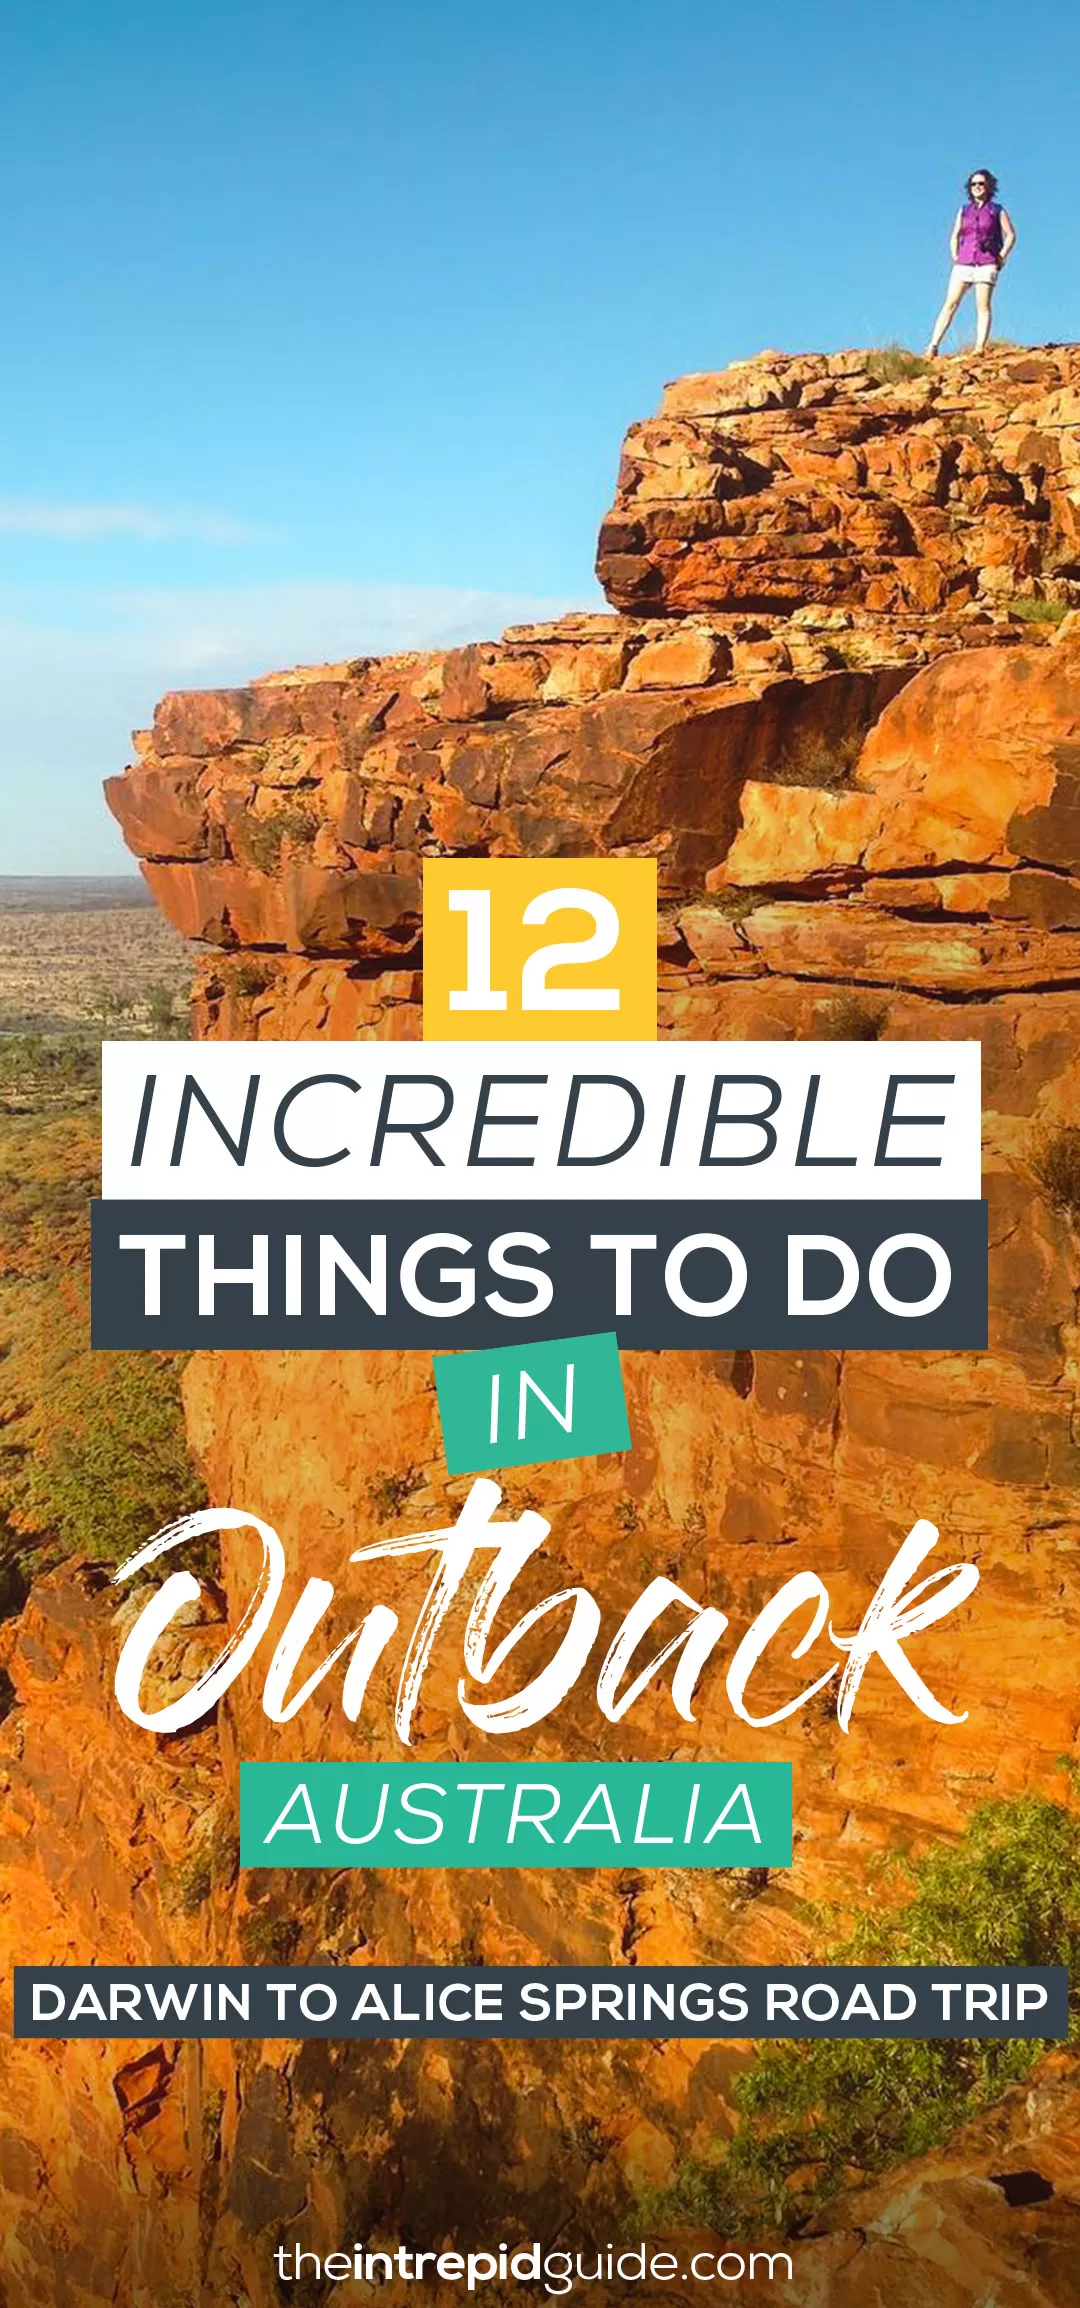 Darwin to Alice Springs Road Trip - 12 Incredible Things to do in the Northern Territory